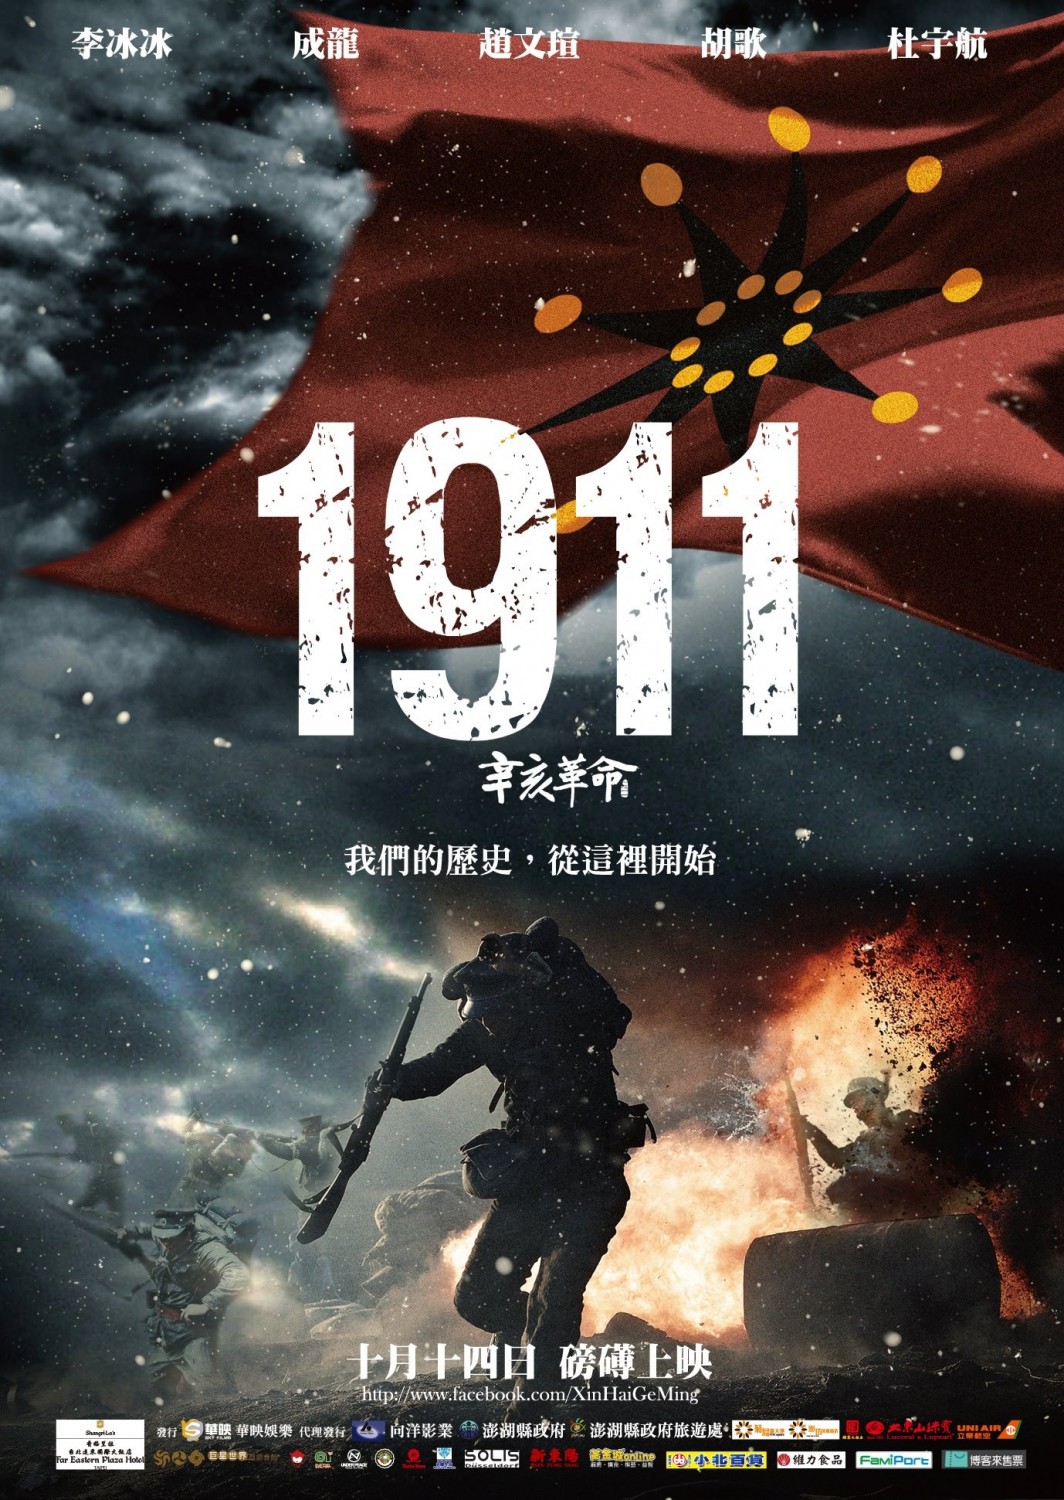 Extra Large Movie Poster Image for Xinhai geming (#10 of 11)